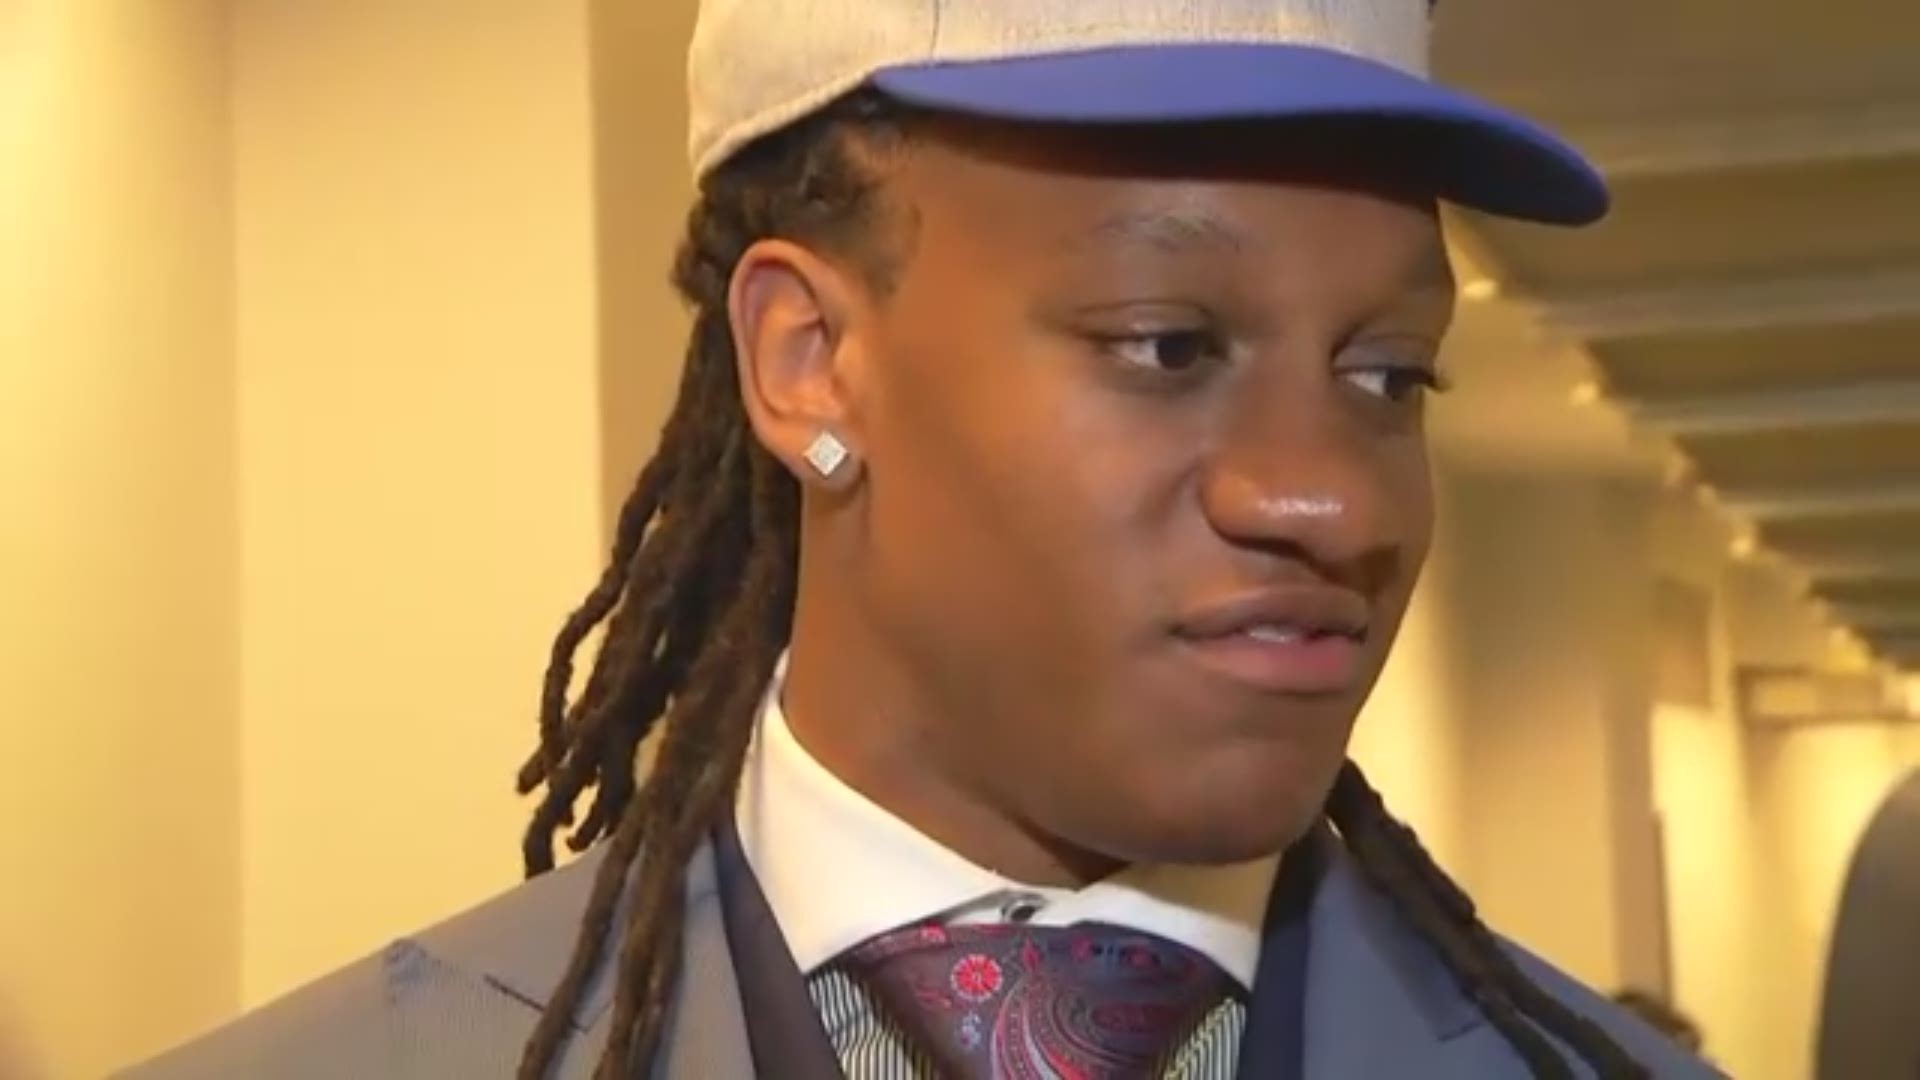 Tremaine Edmunds is young but ready for his chance with the Bills.